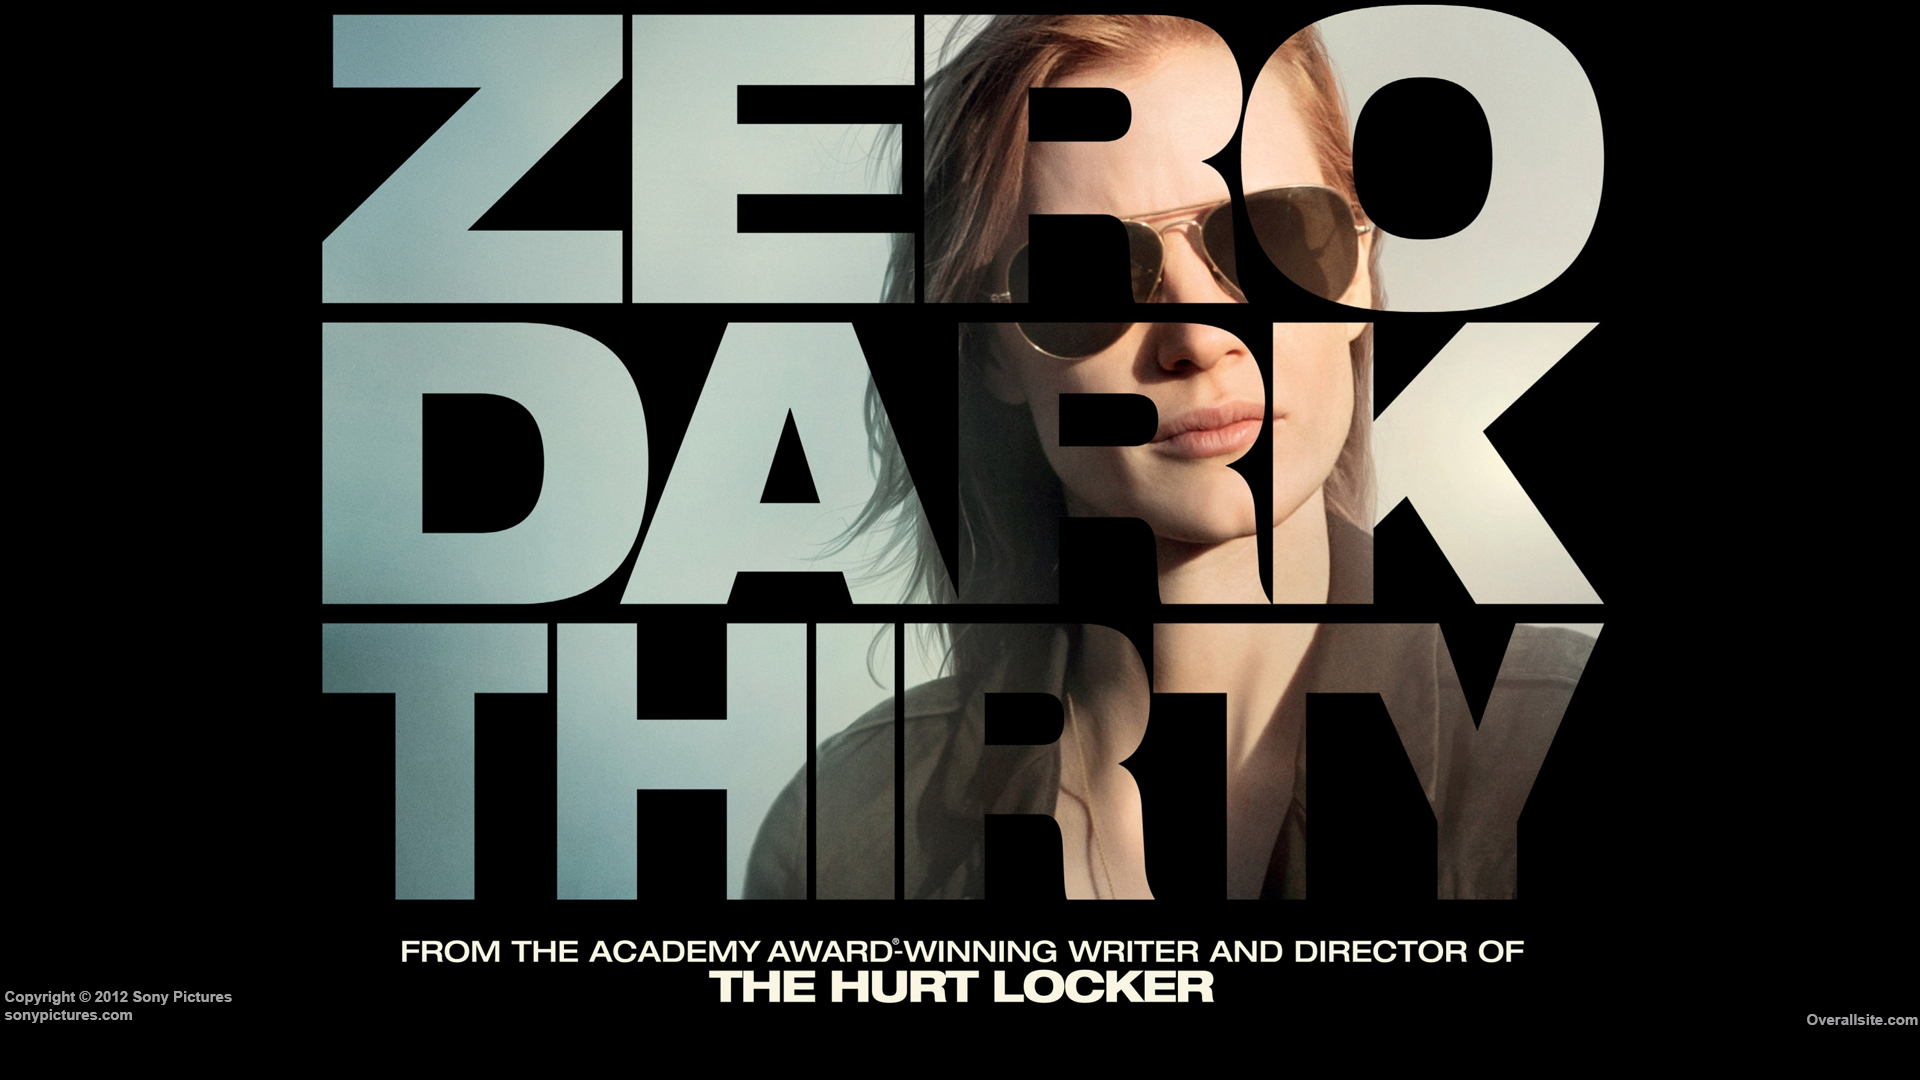 Zero Dark Thirty Backgrounds, Compatible - PC, Mobile, Gadgets| 1920x1080 px